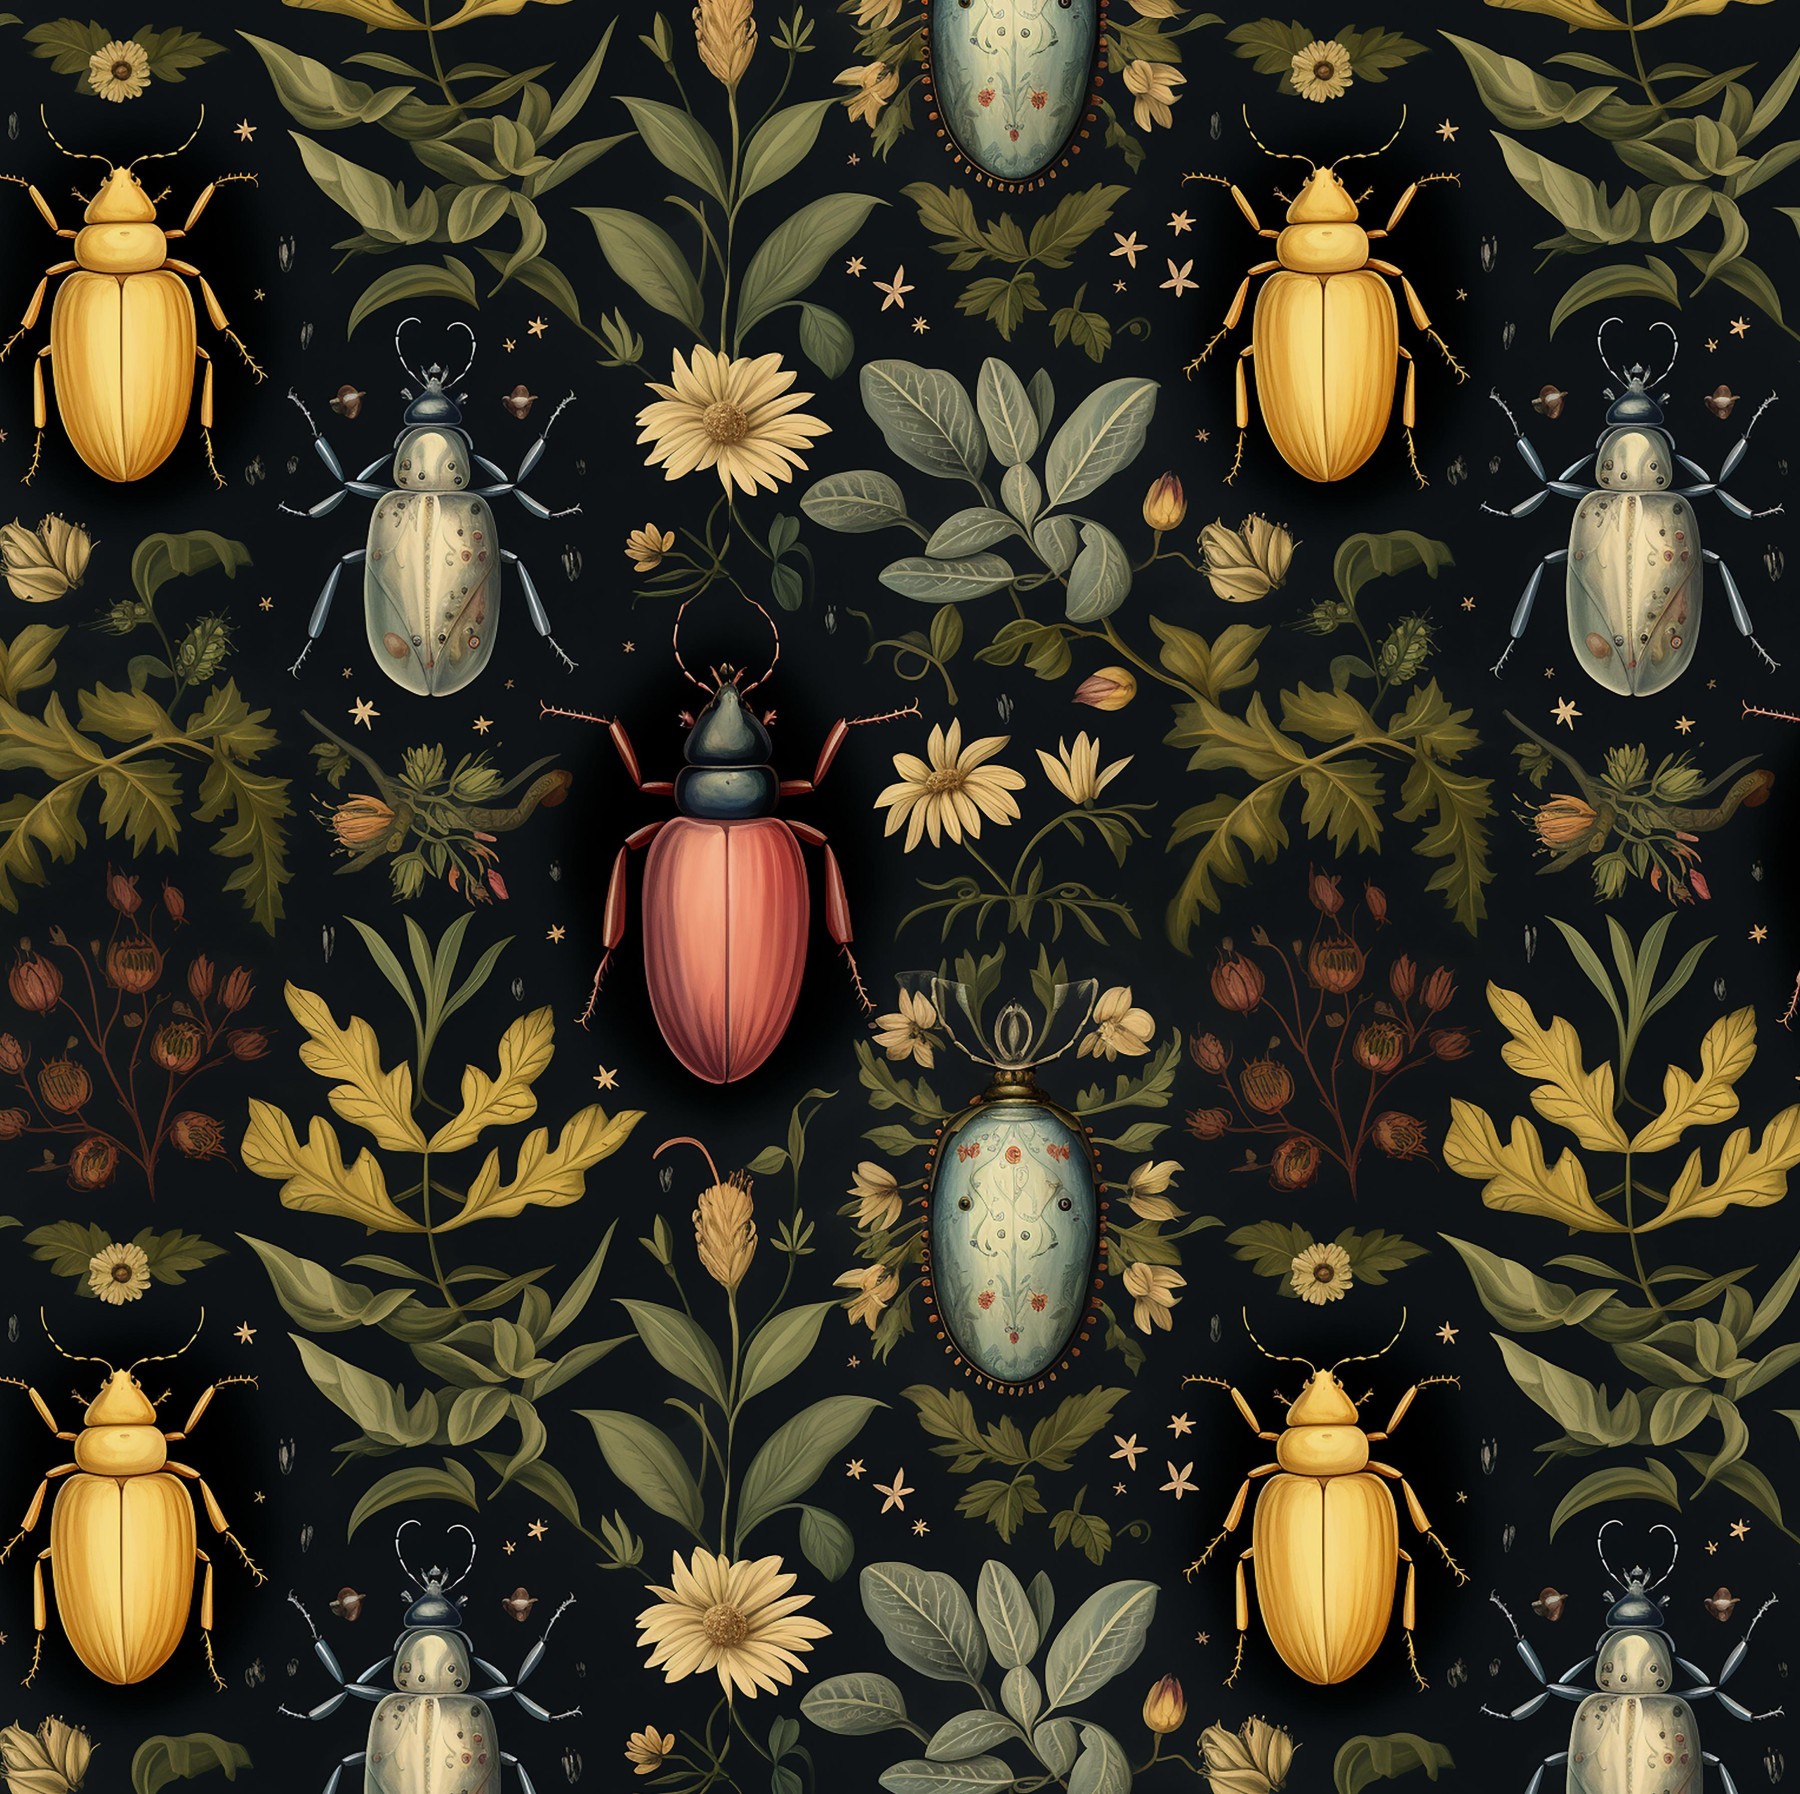 Botanical wz.4 - Woven Fabric for tablecloths